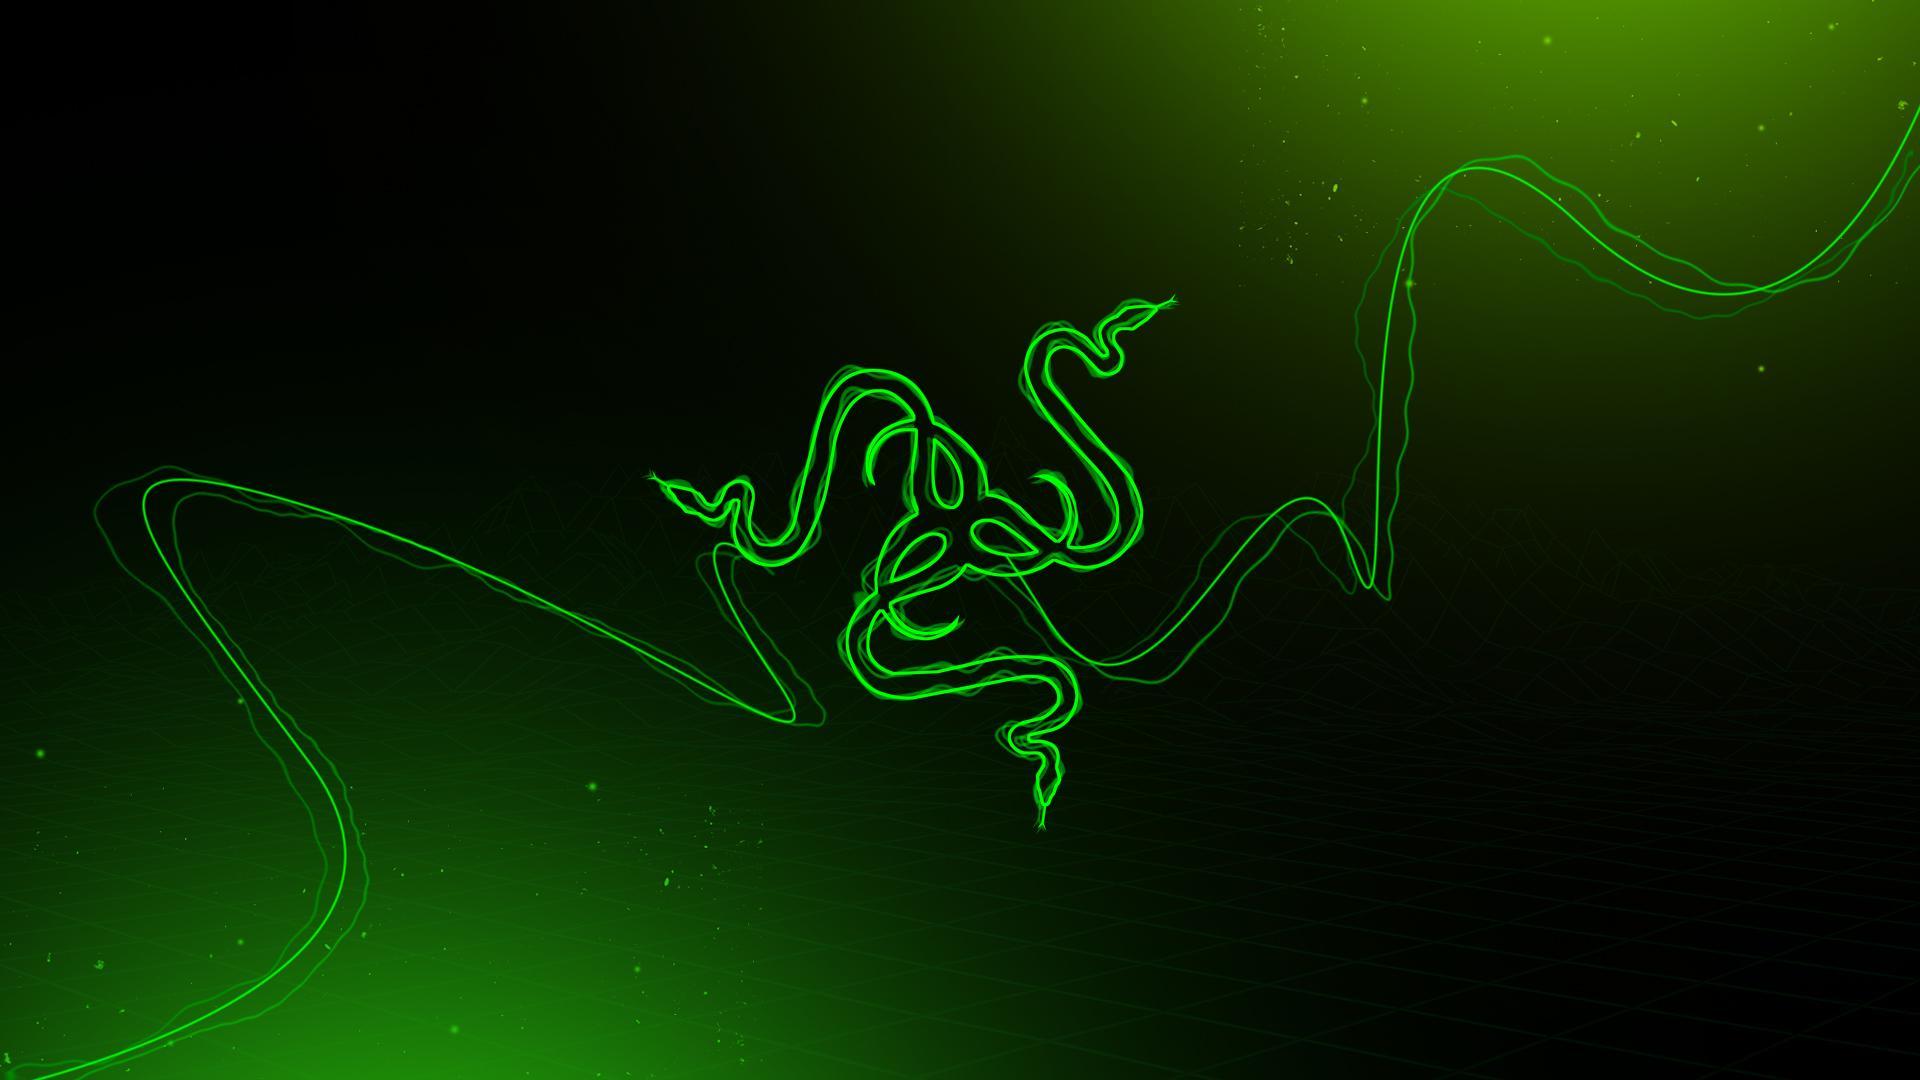 Original Razer wallpaper, feel free to use for your personal use